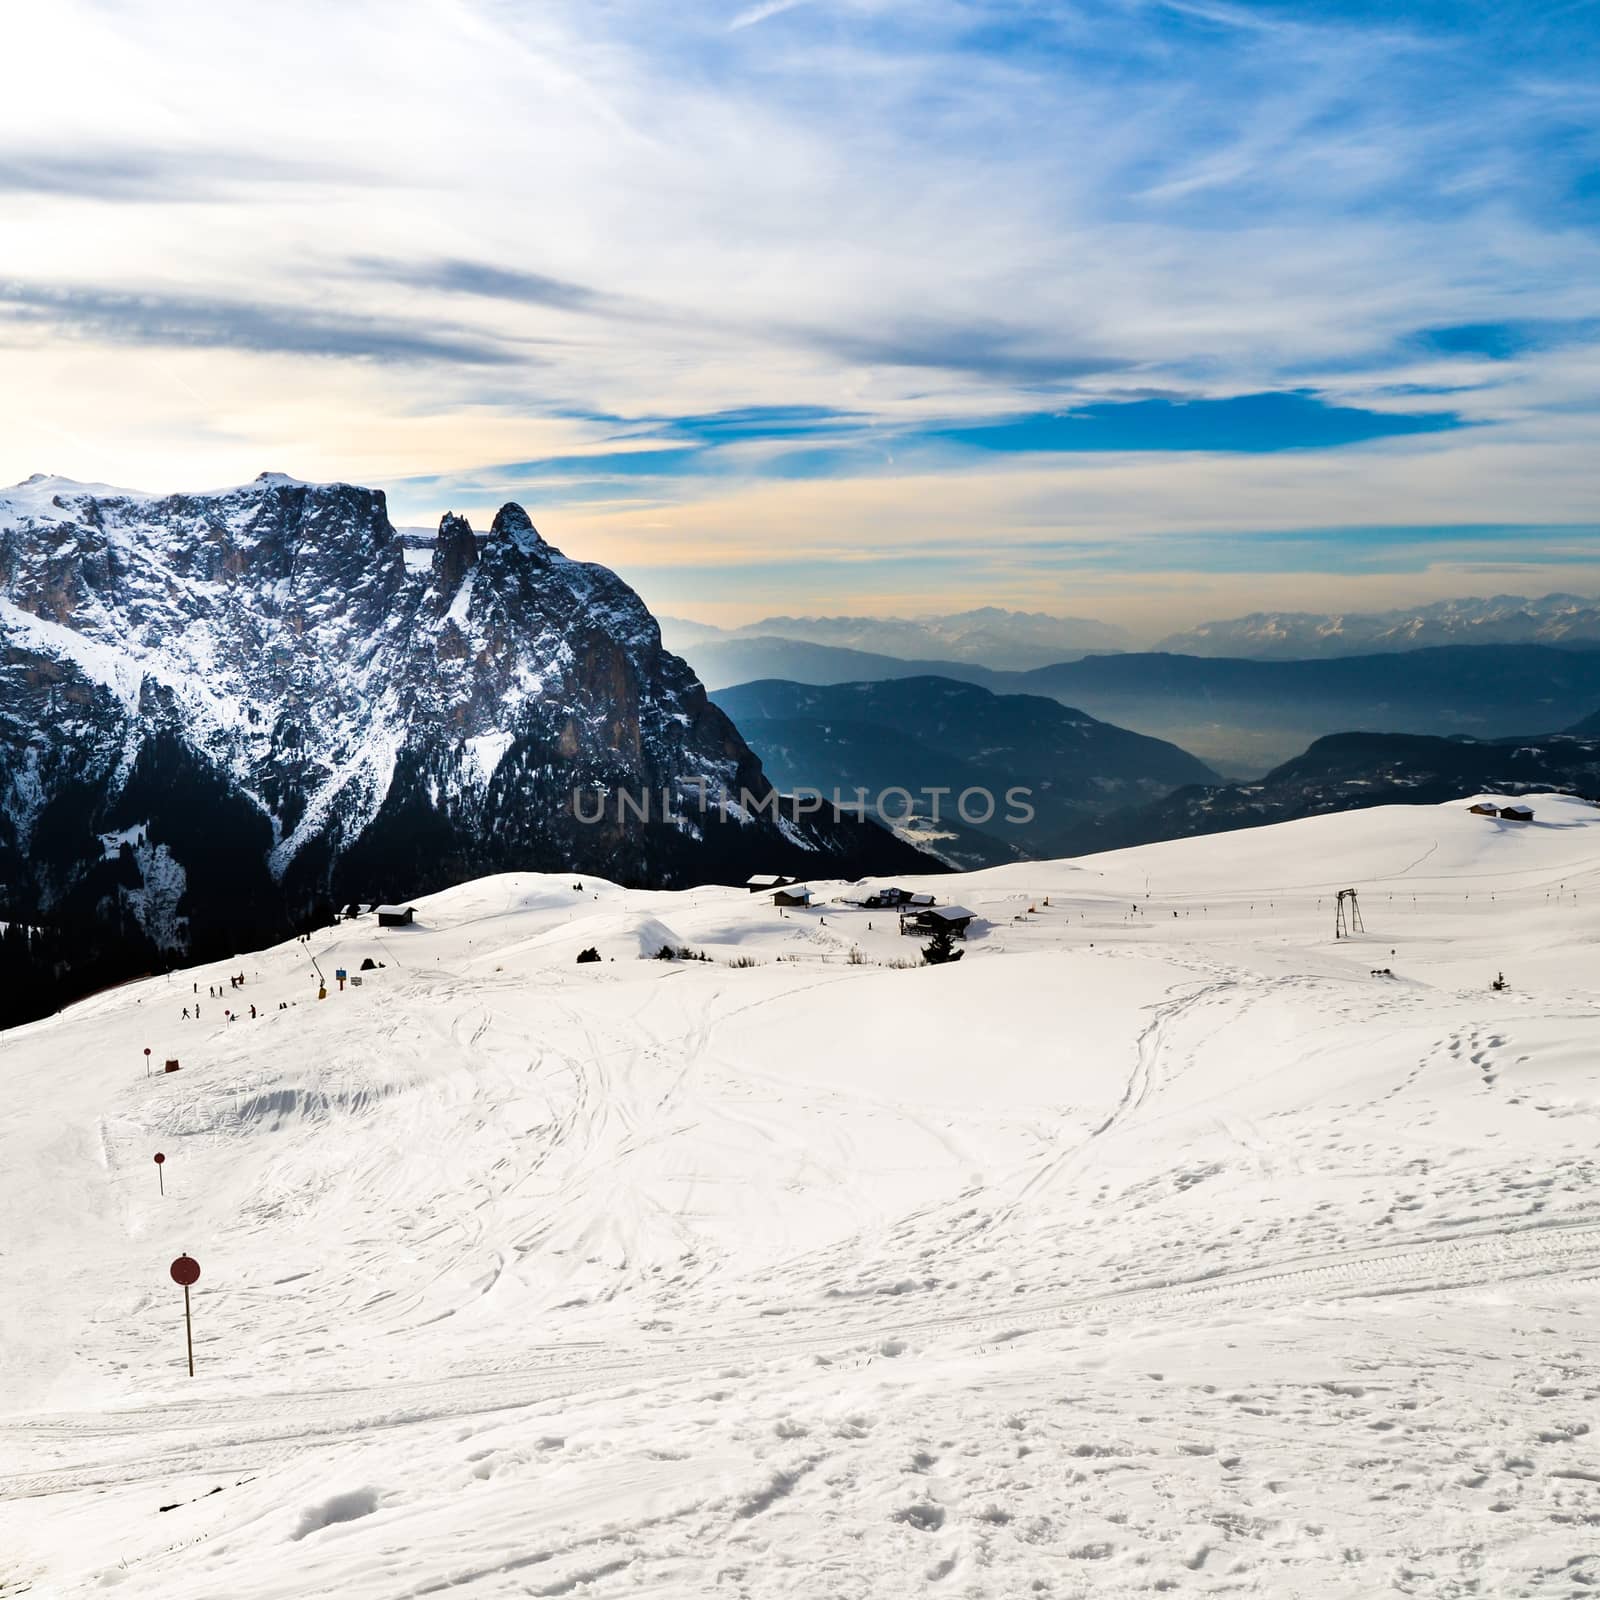 Ski slopes covered with snow on the Italian Alps.